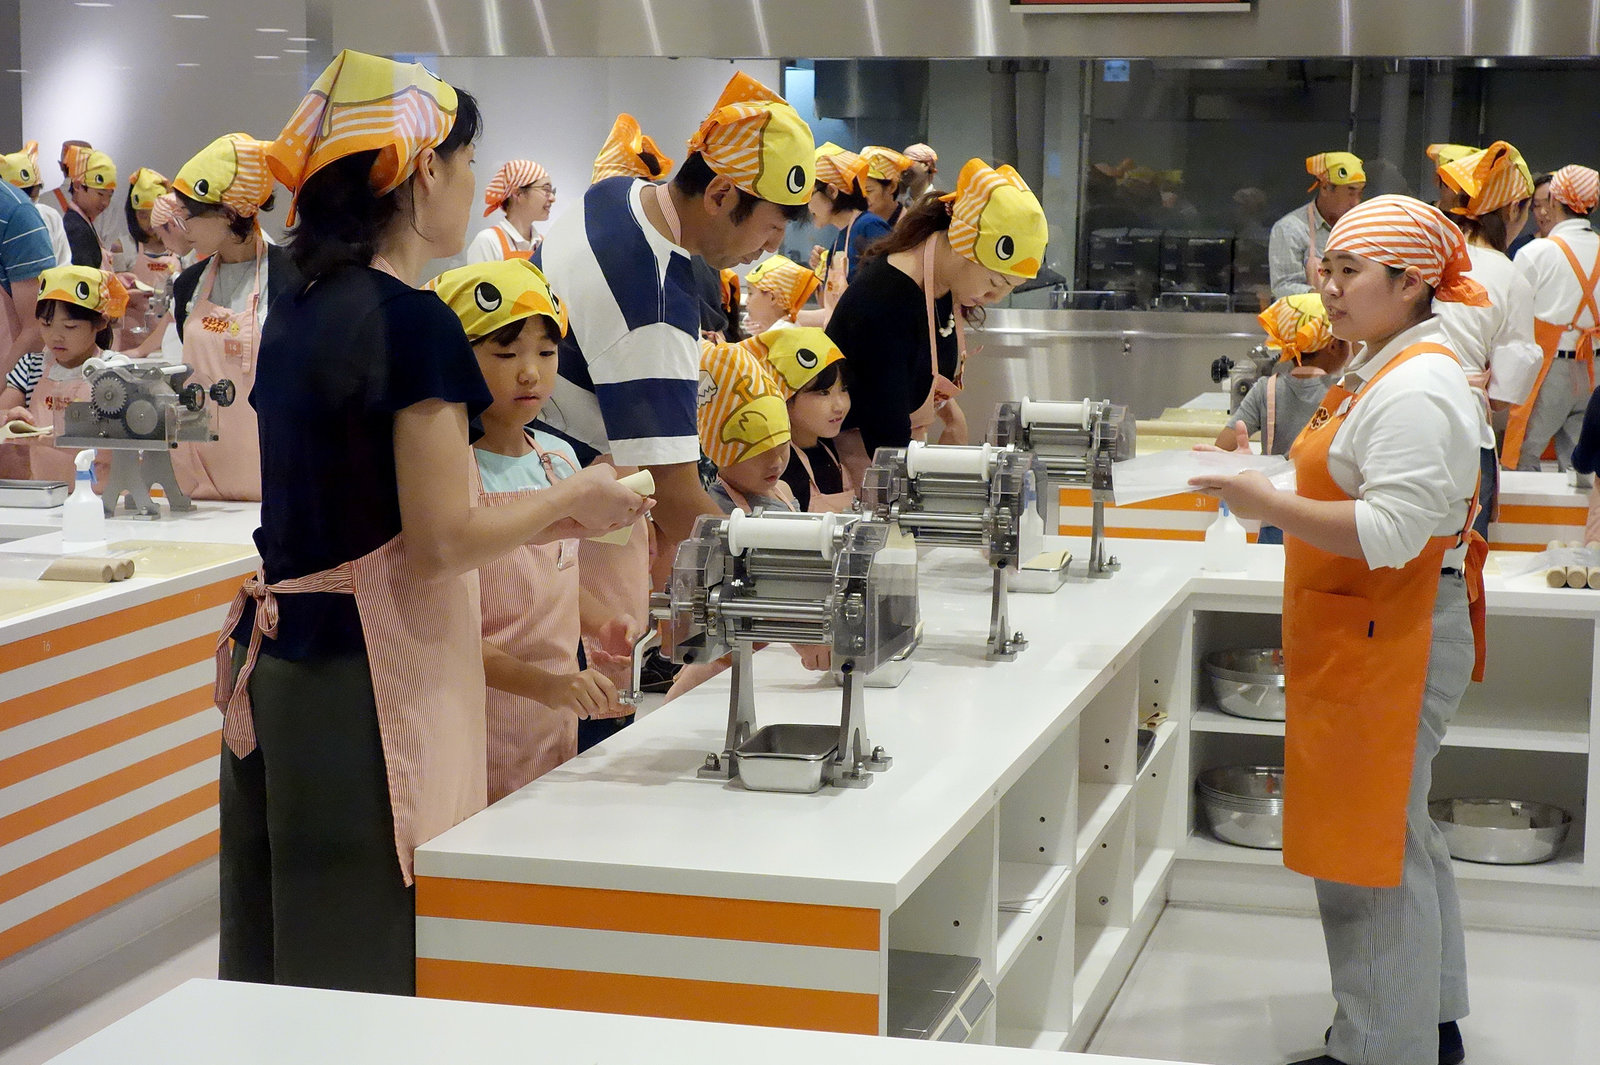 Visitors make their own noodles in the museum's working kitchen.